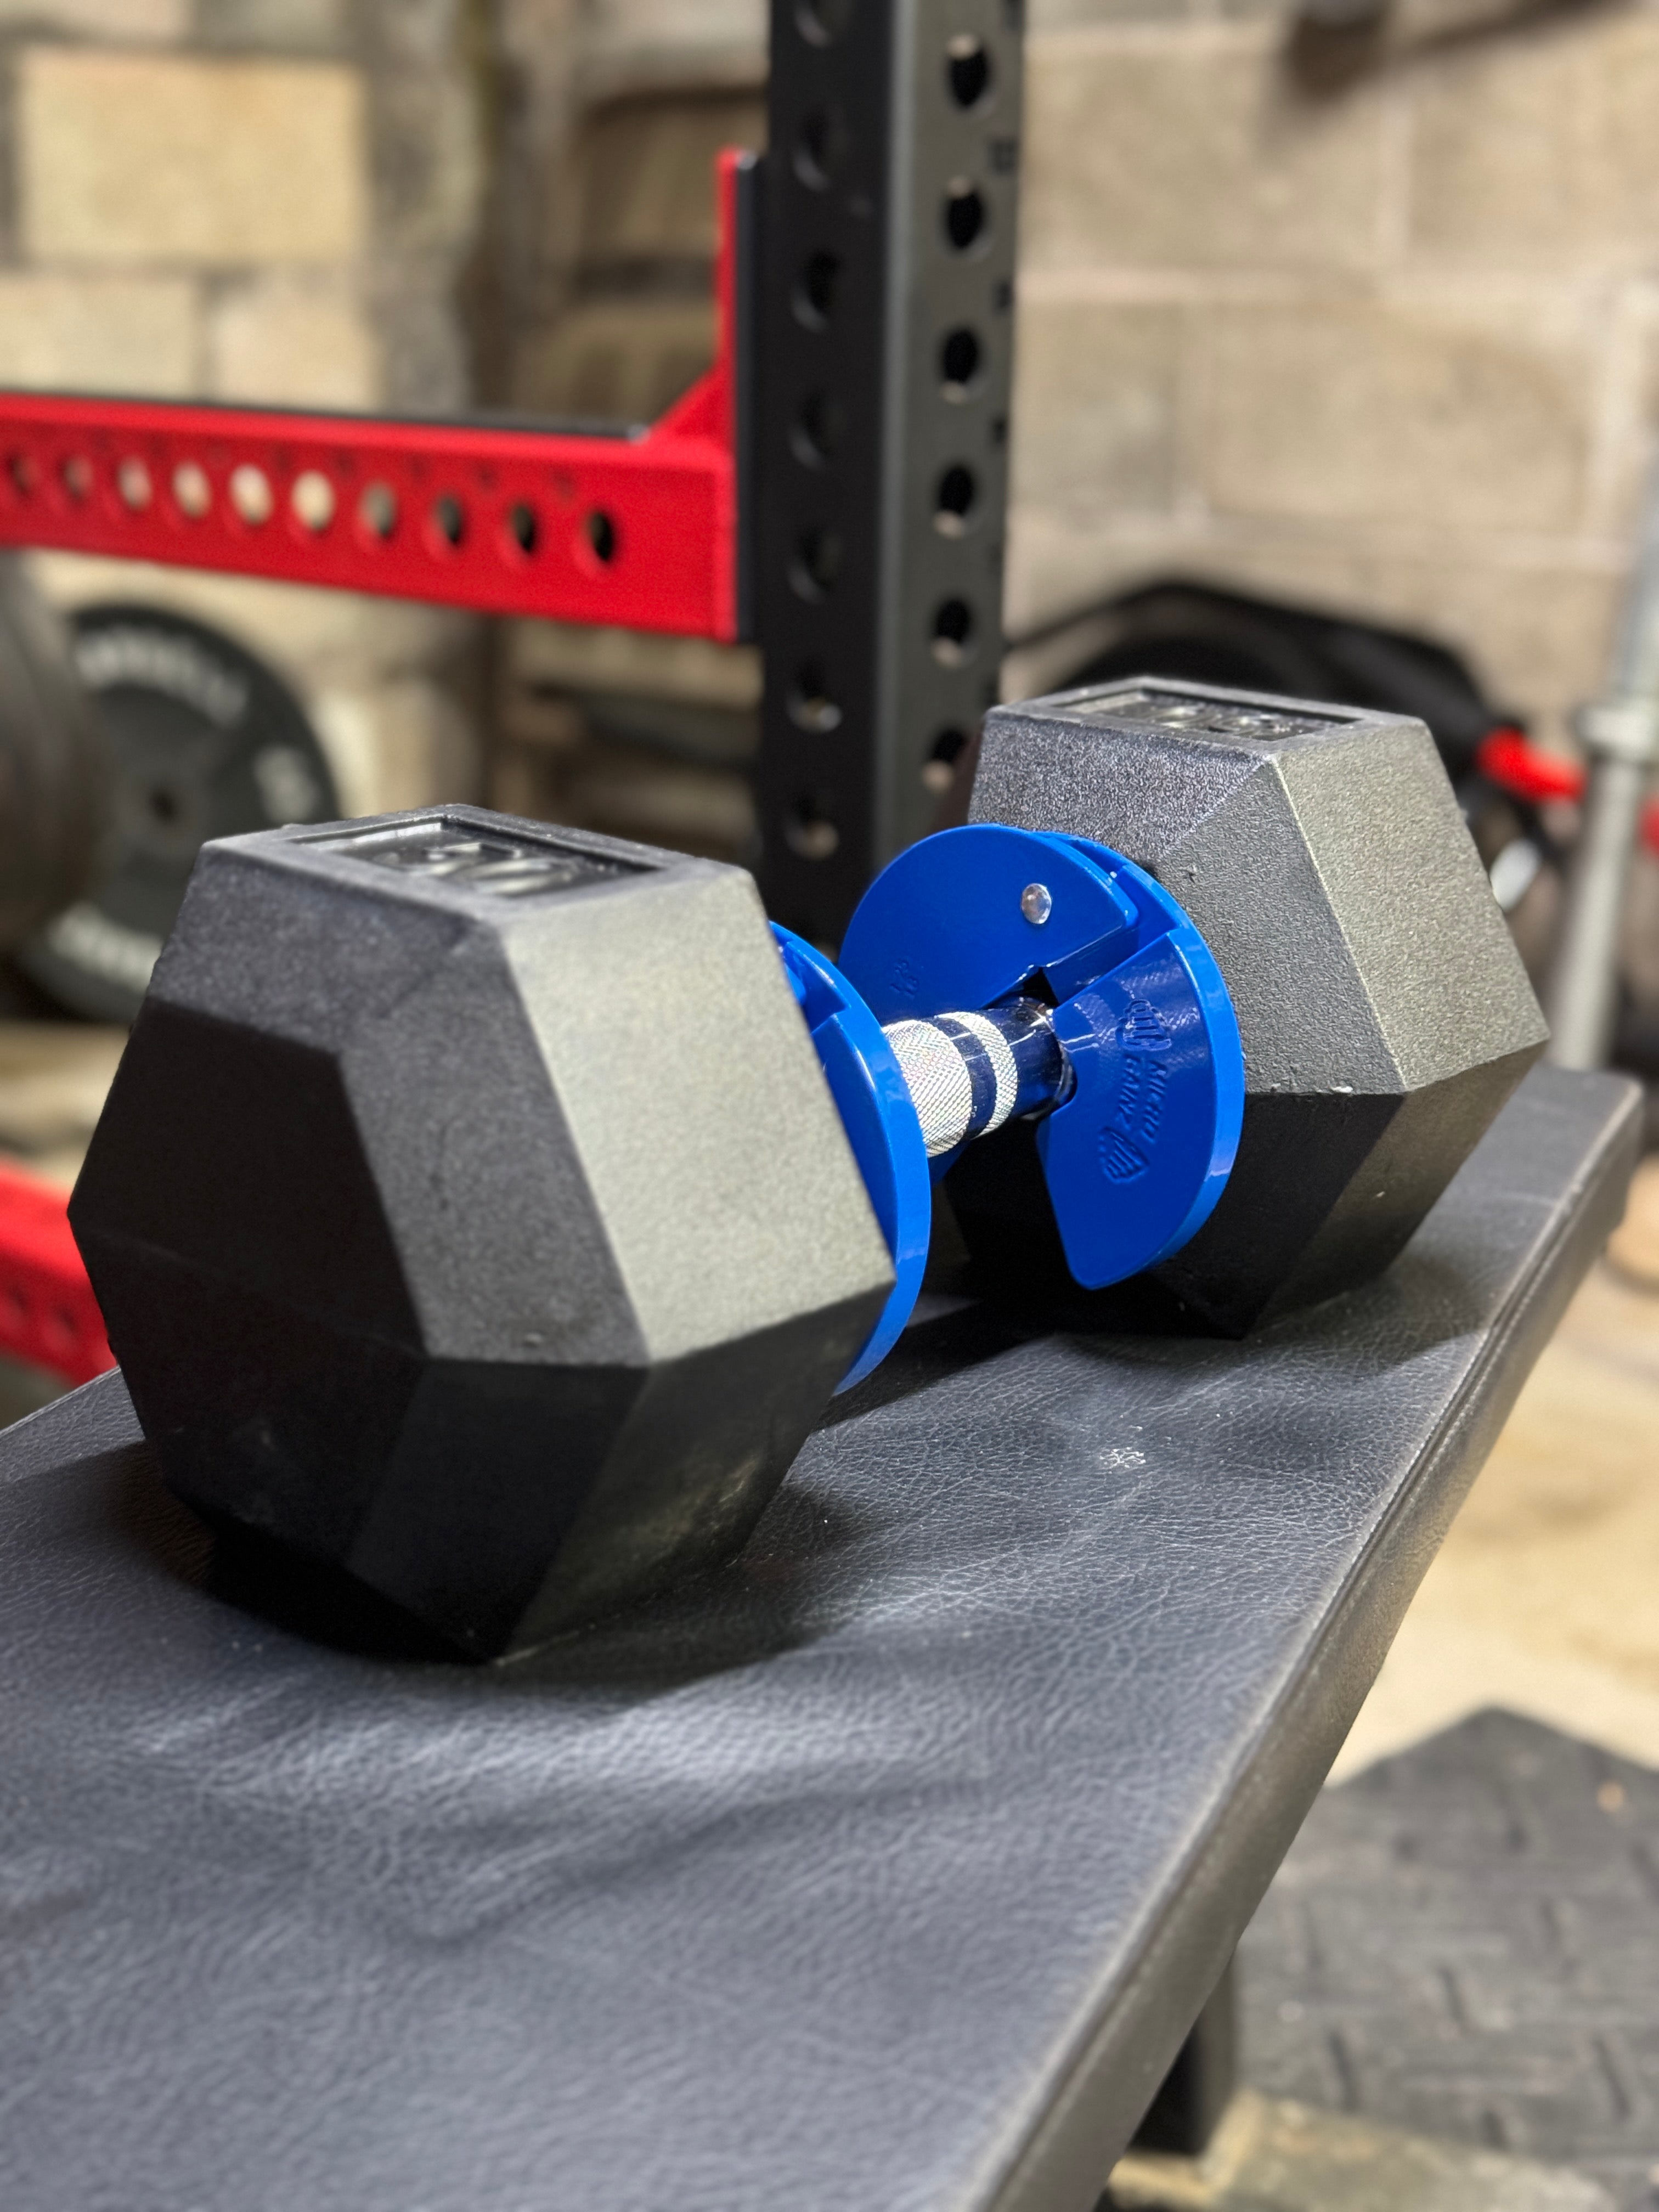 Micro Gainz Blue 1.25LB Dumbbell Fractional Weight Plates